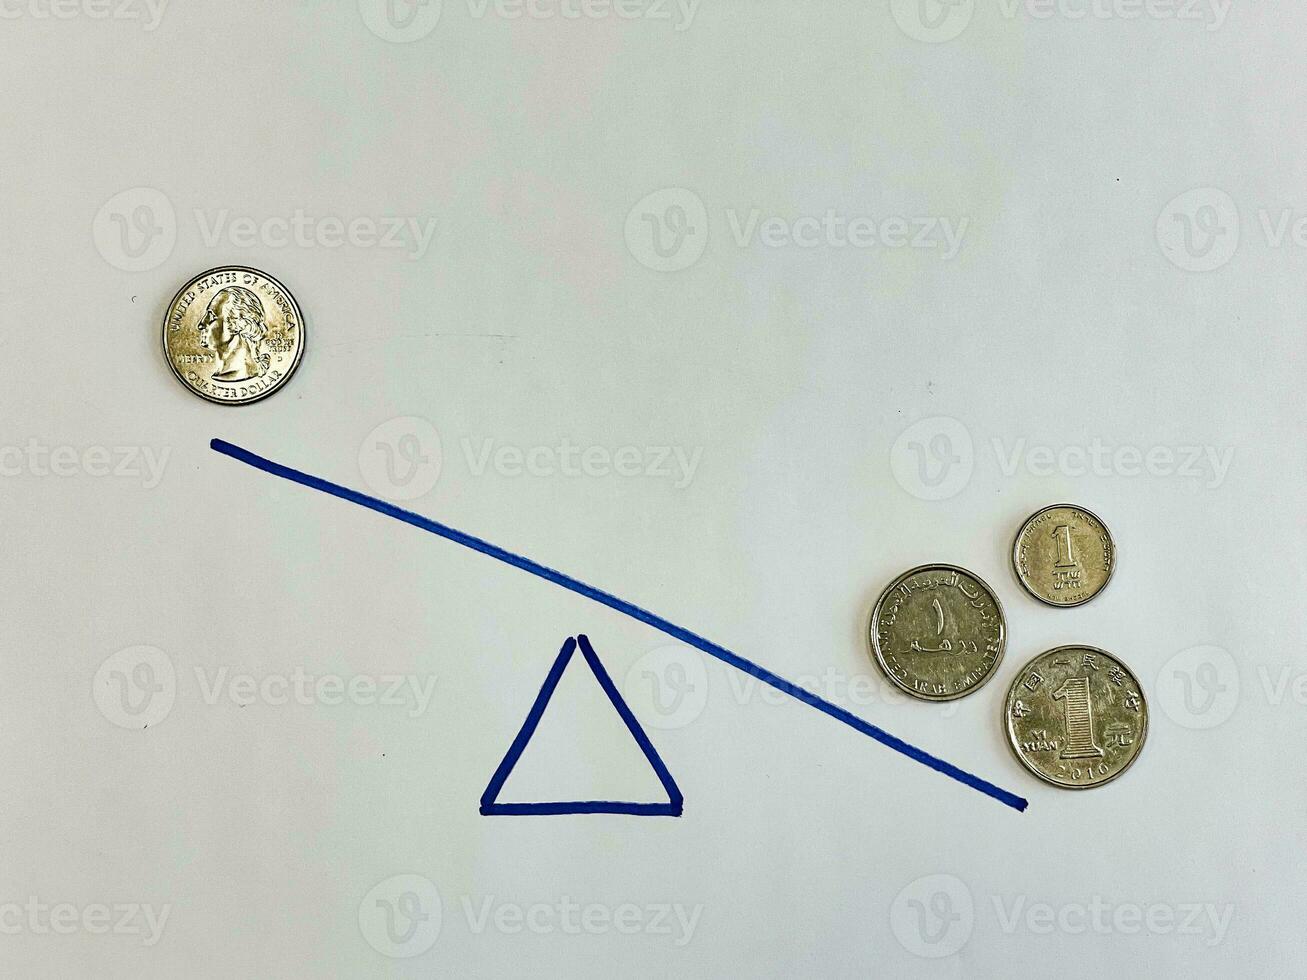 US quarter dollar coin vs one yuan, one dirham and one shekel on drawn scales photo